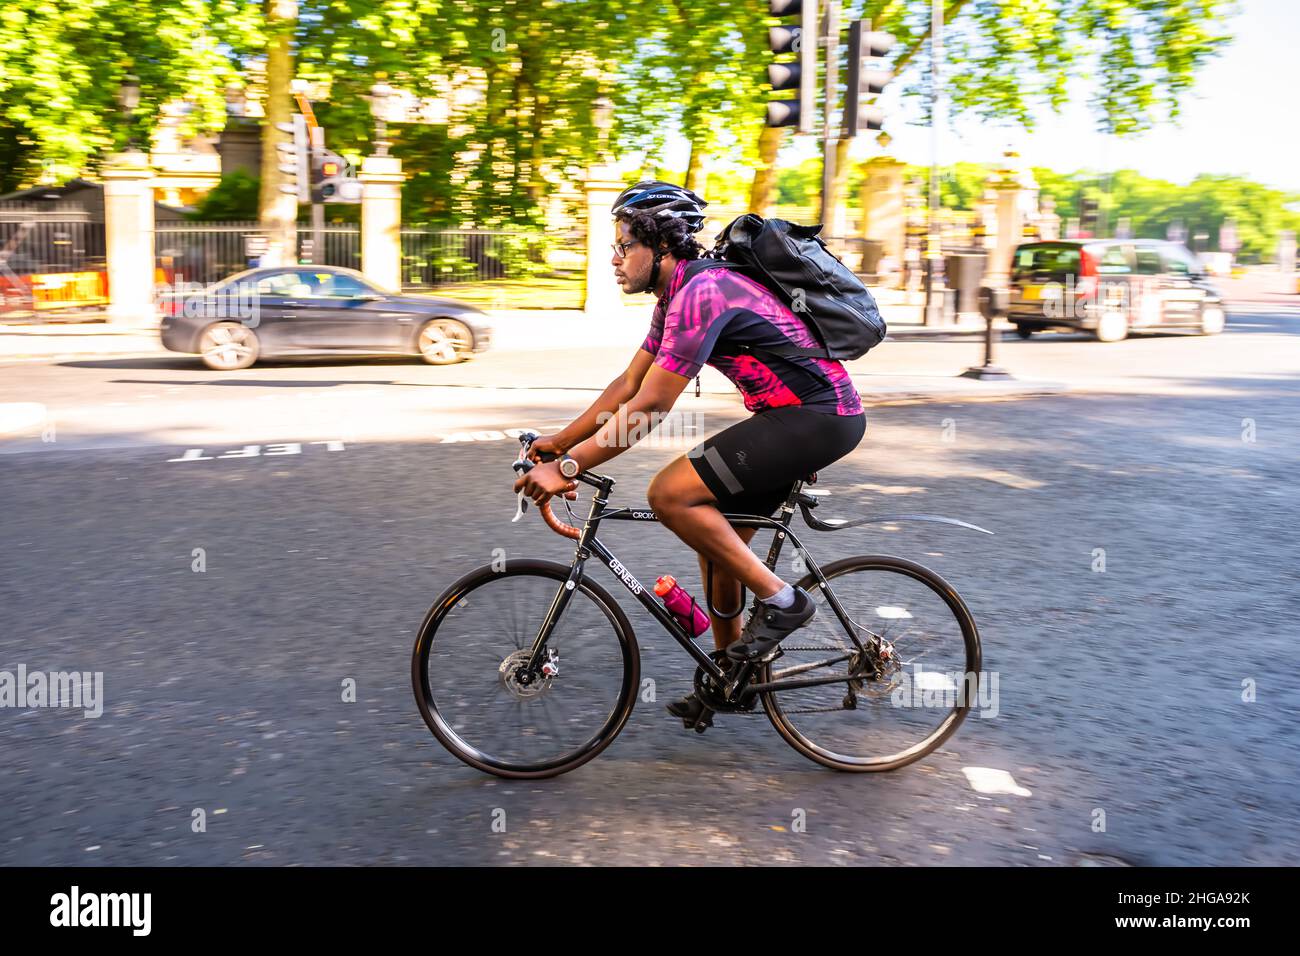 London, UK - June 22, 2018: Side view panning of candid local man riding bicycle bike sport in traffic on street road in London with blurred motion ac Stock Photo